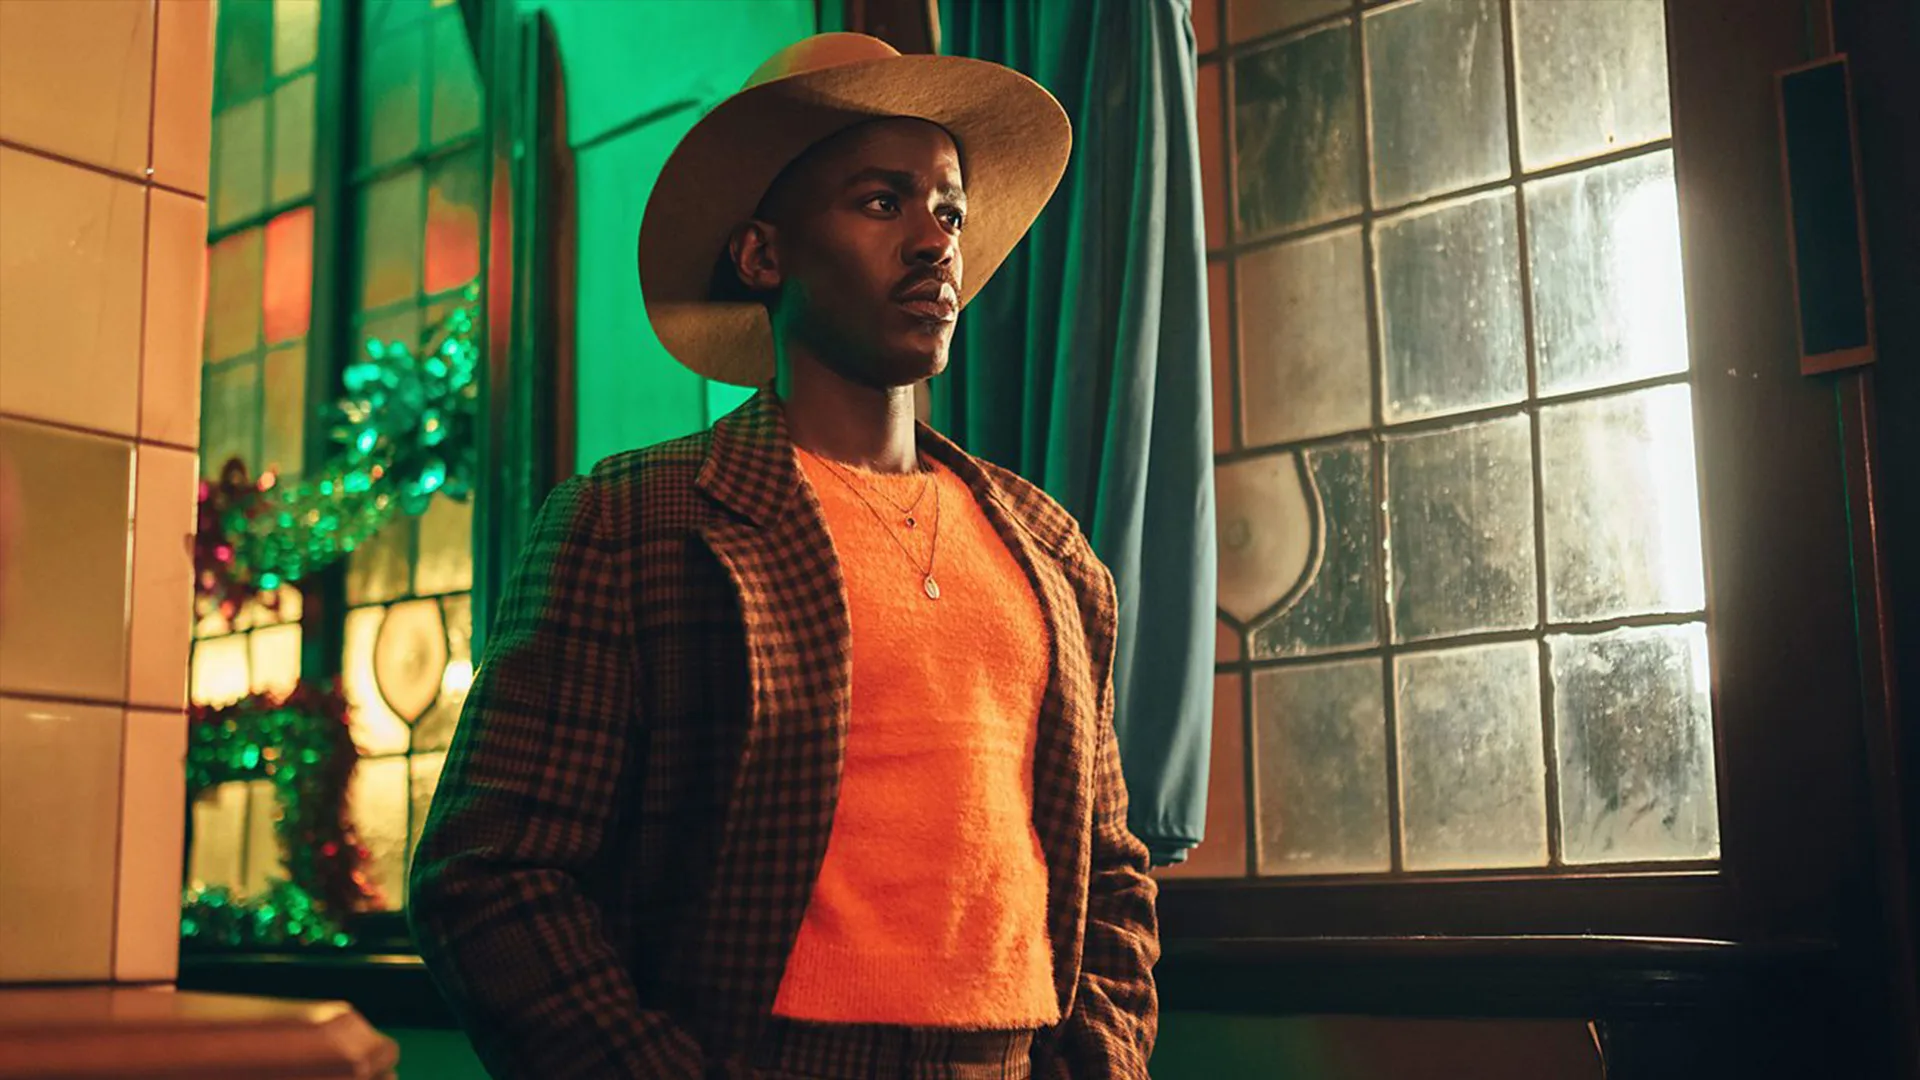 Actor Ncuti Gatwa in orange top and cowboy hat against green background